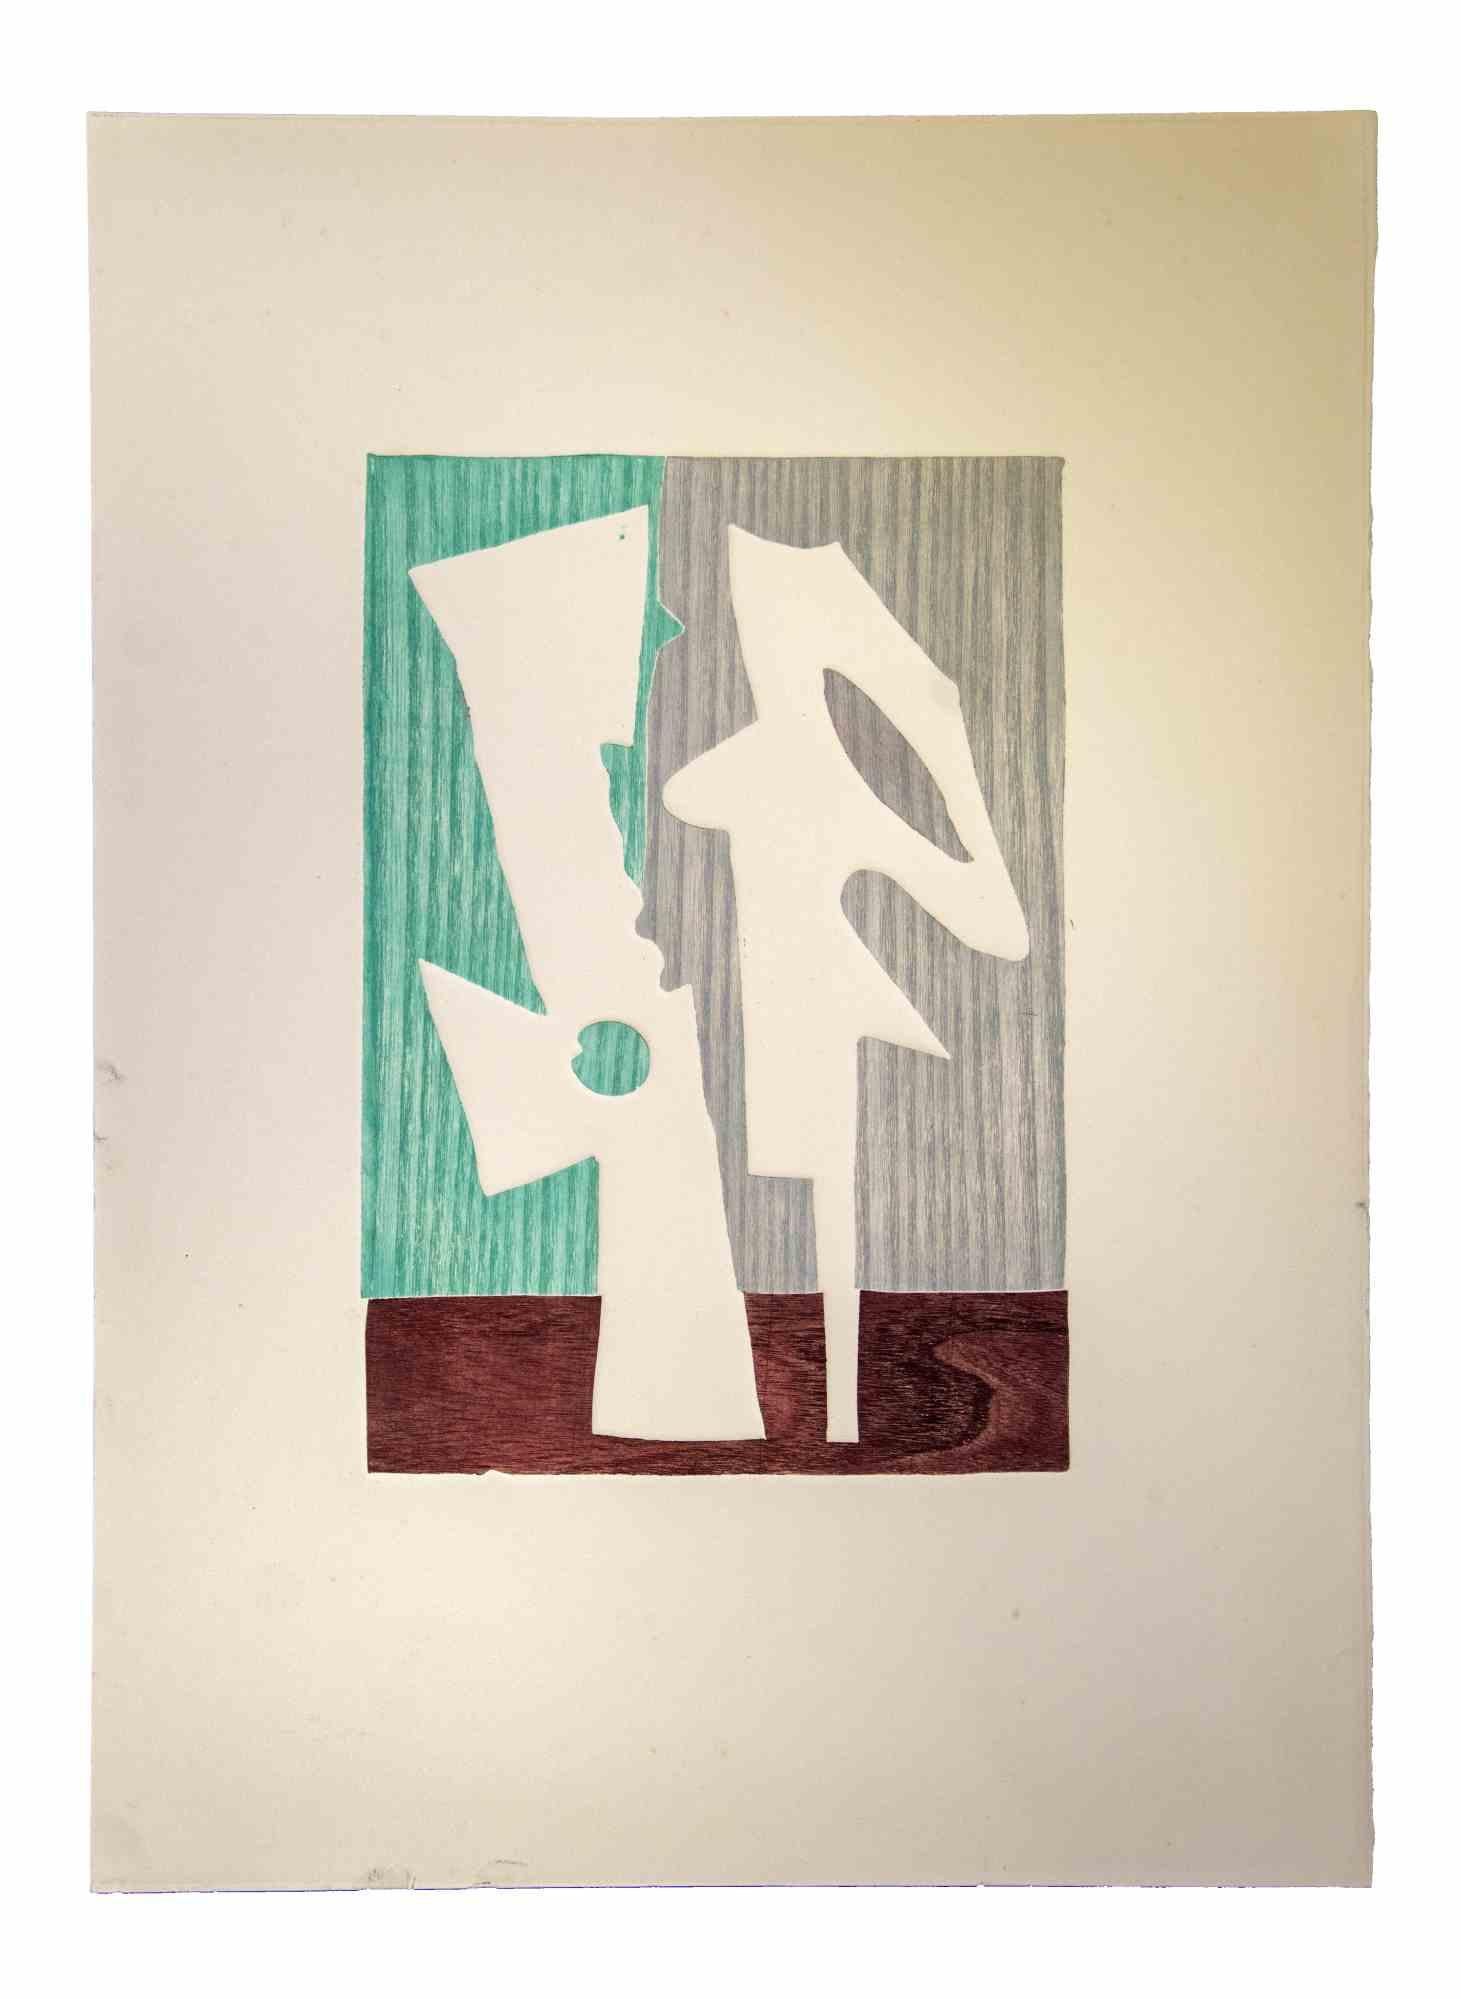 Composition is an original etching realized by Leo Guida in 1970s.

Good condition.

Mounted on a white cardboard passpartout (50x35).

Not signed and not dated.

Leo Guida  (1992 - 2017). Sensitive to current issues, artistic movements and